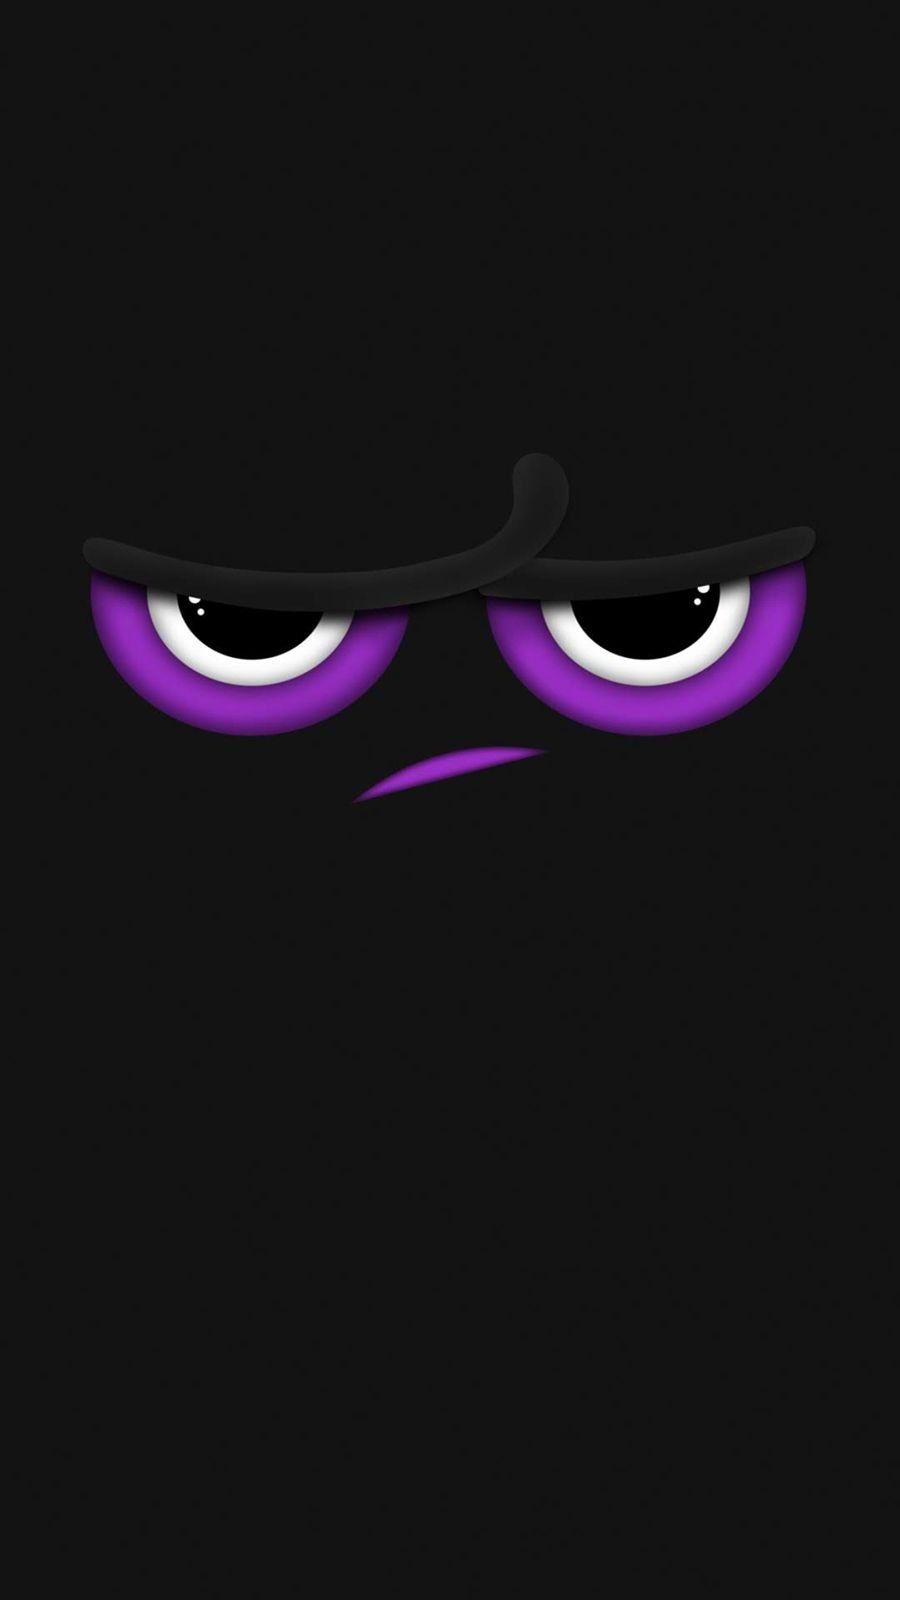 Angry eyes Wallpaper Download